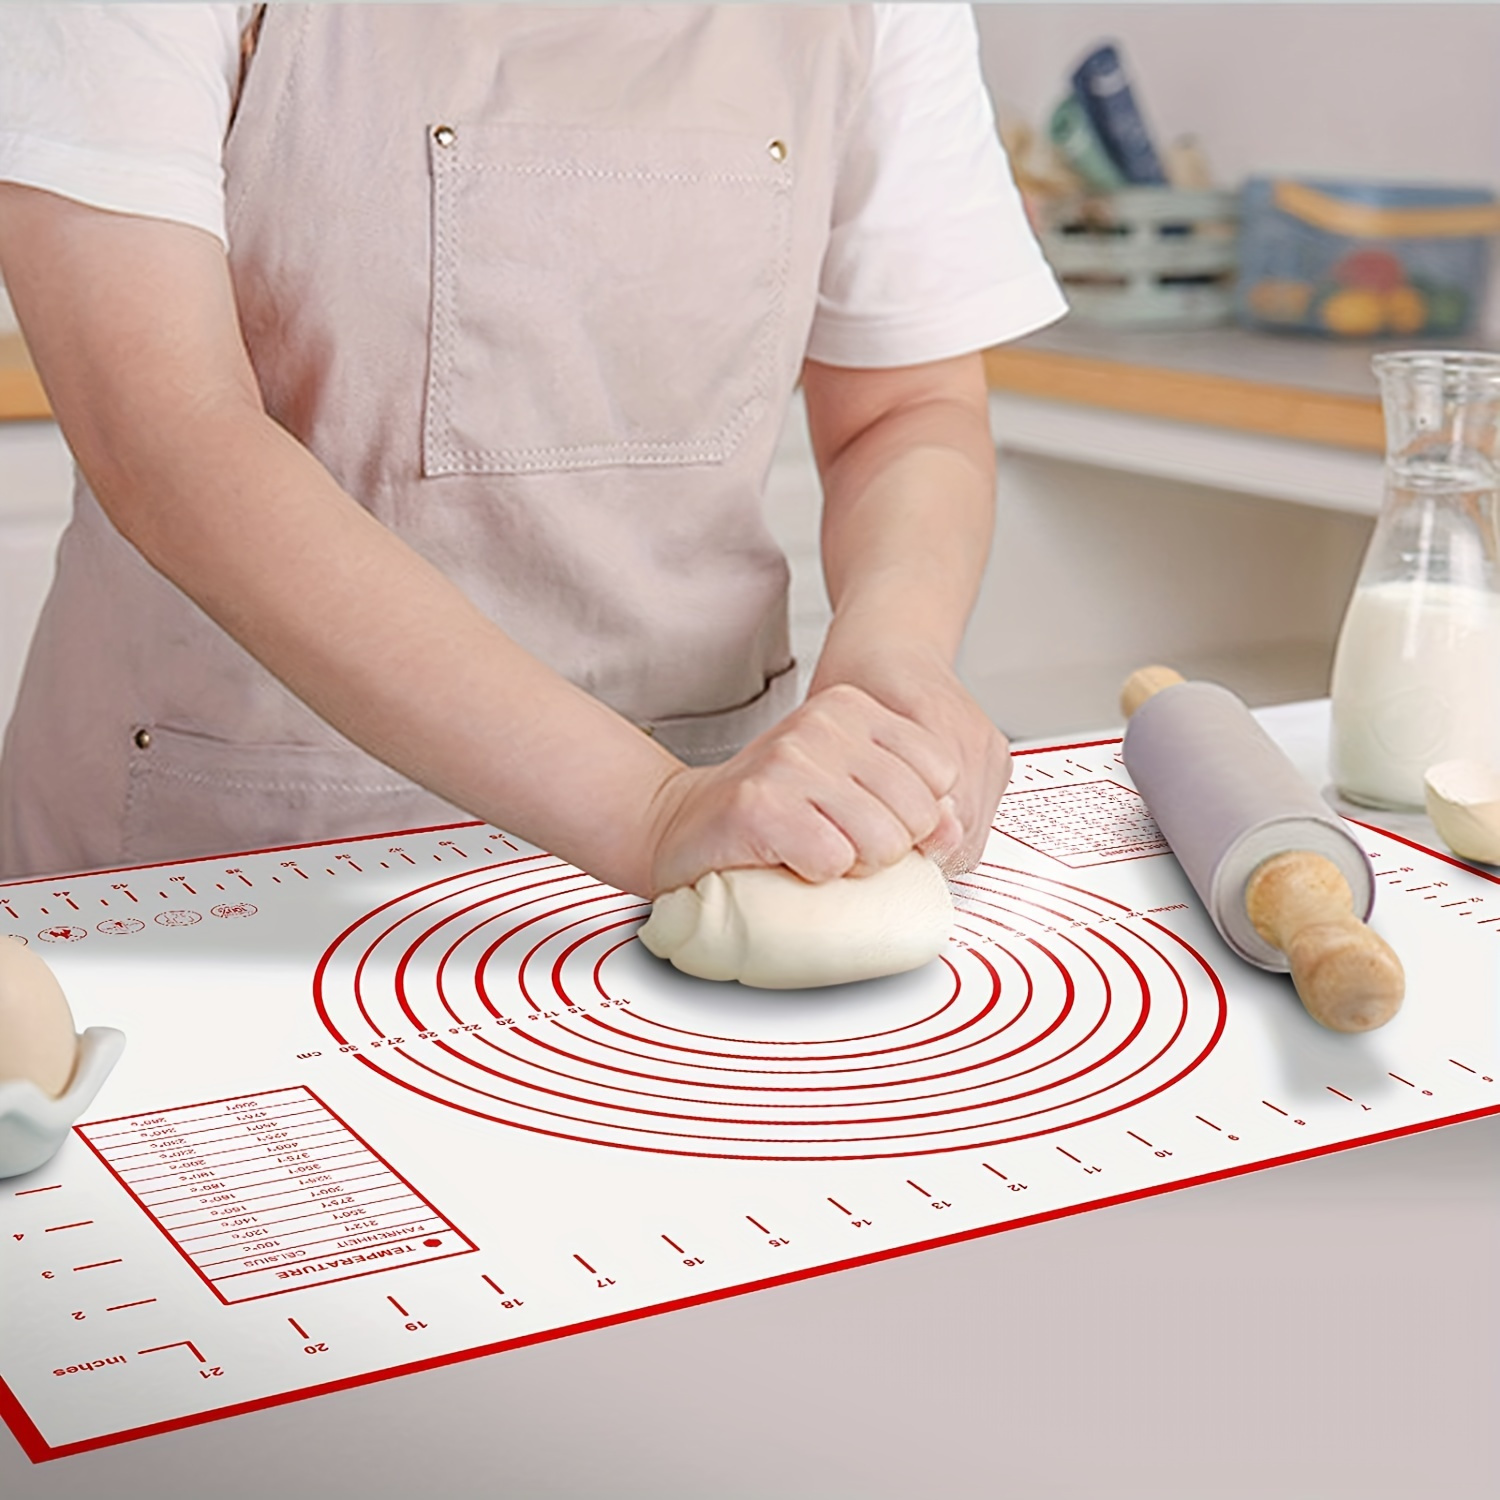 

1pc Silicone Baking Mat With Measurement Counter And Dough Rolling And Pie Crust Mats - Perfect For Baking And Cooking